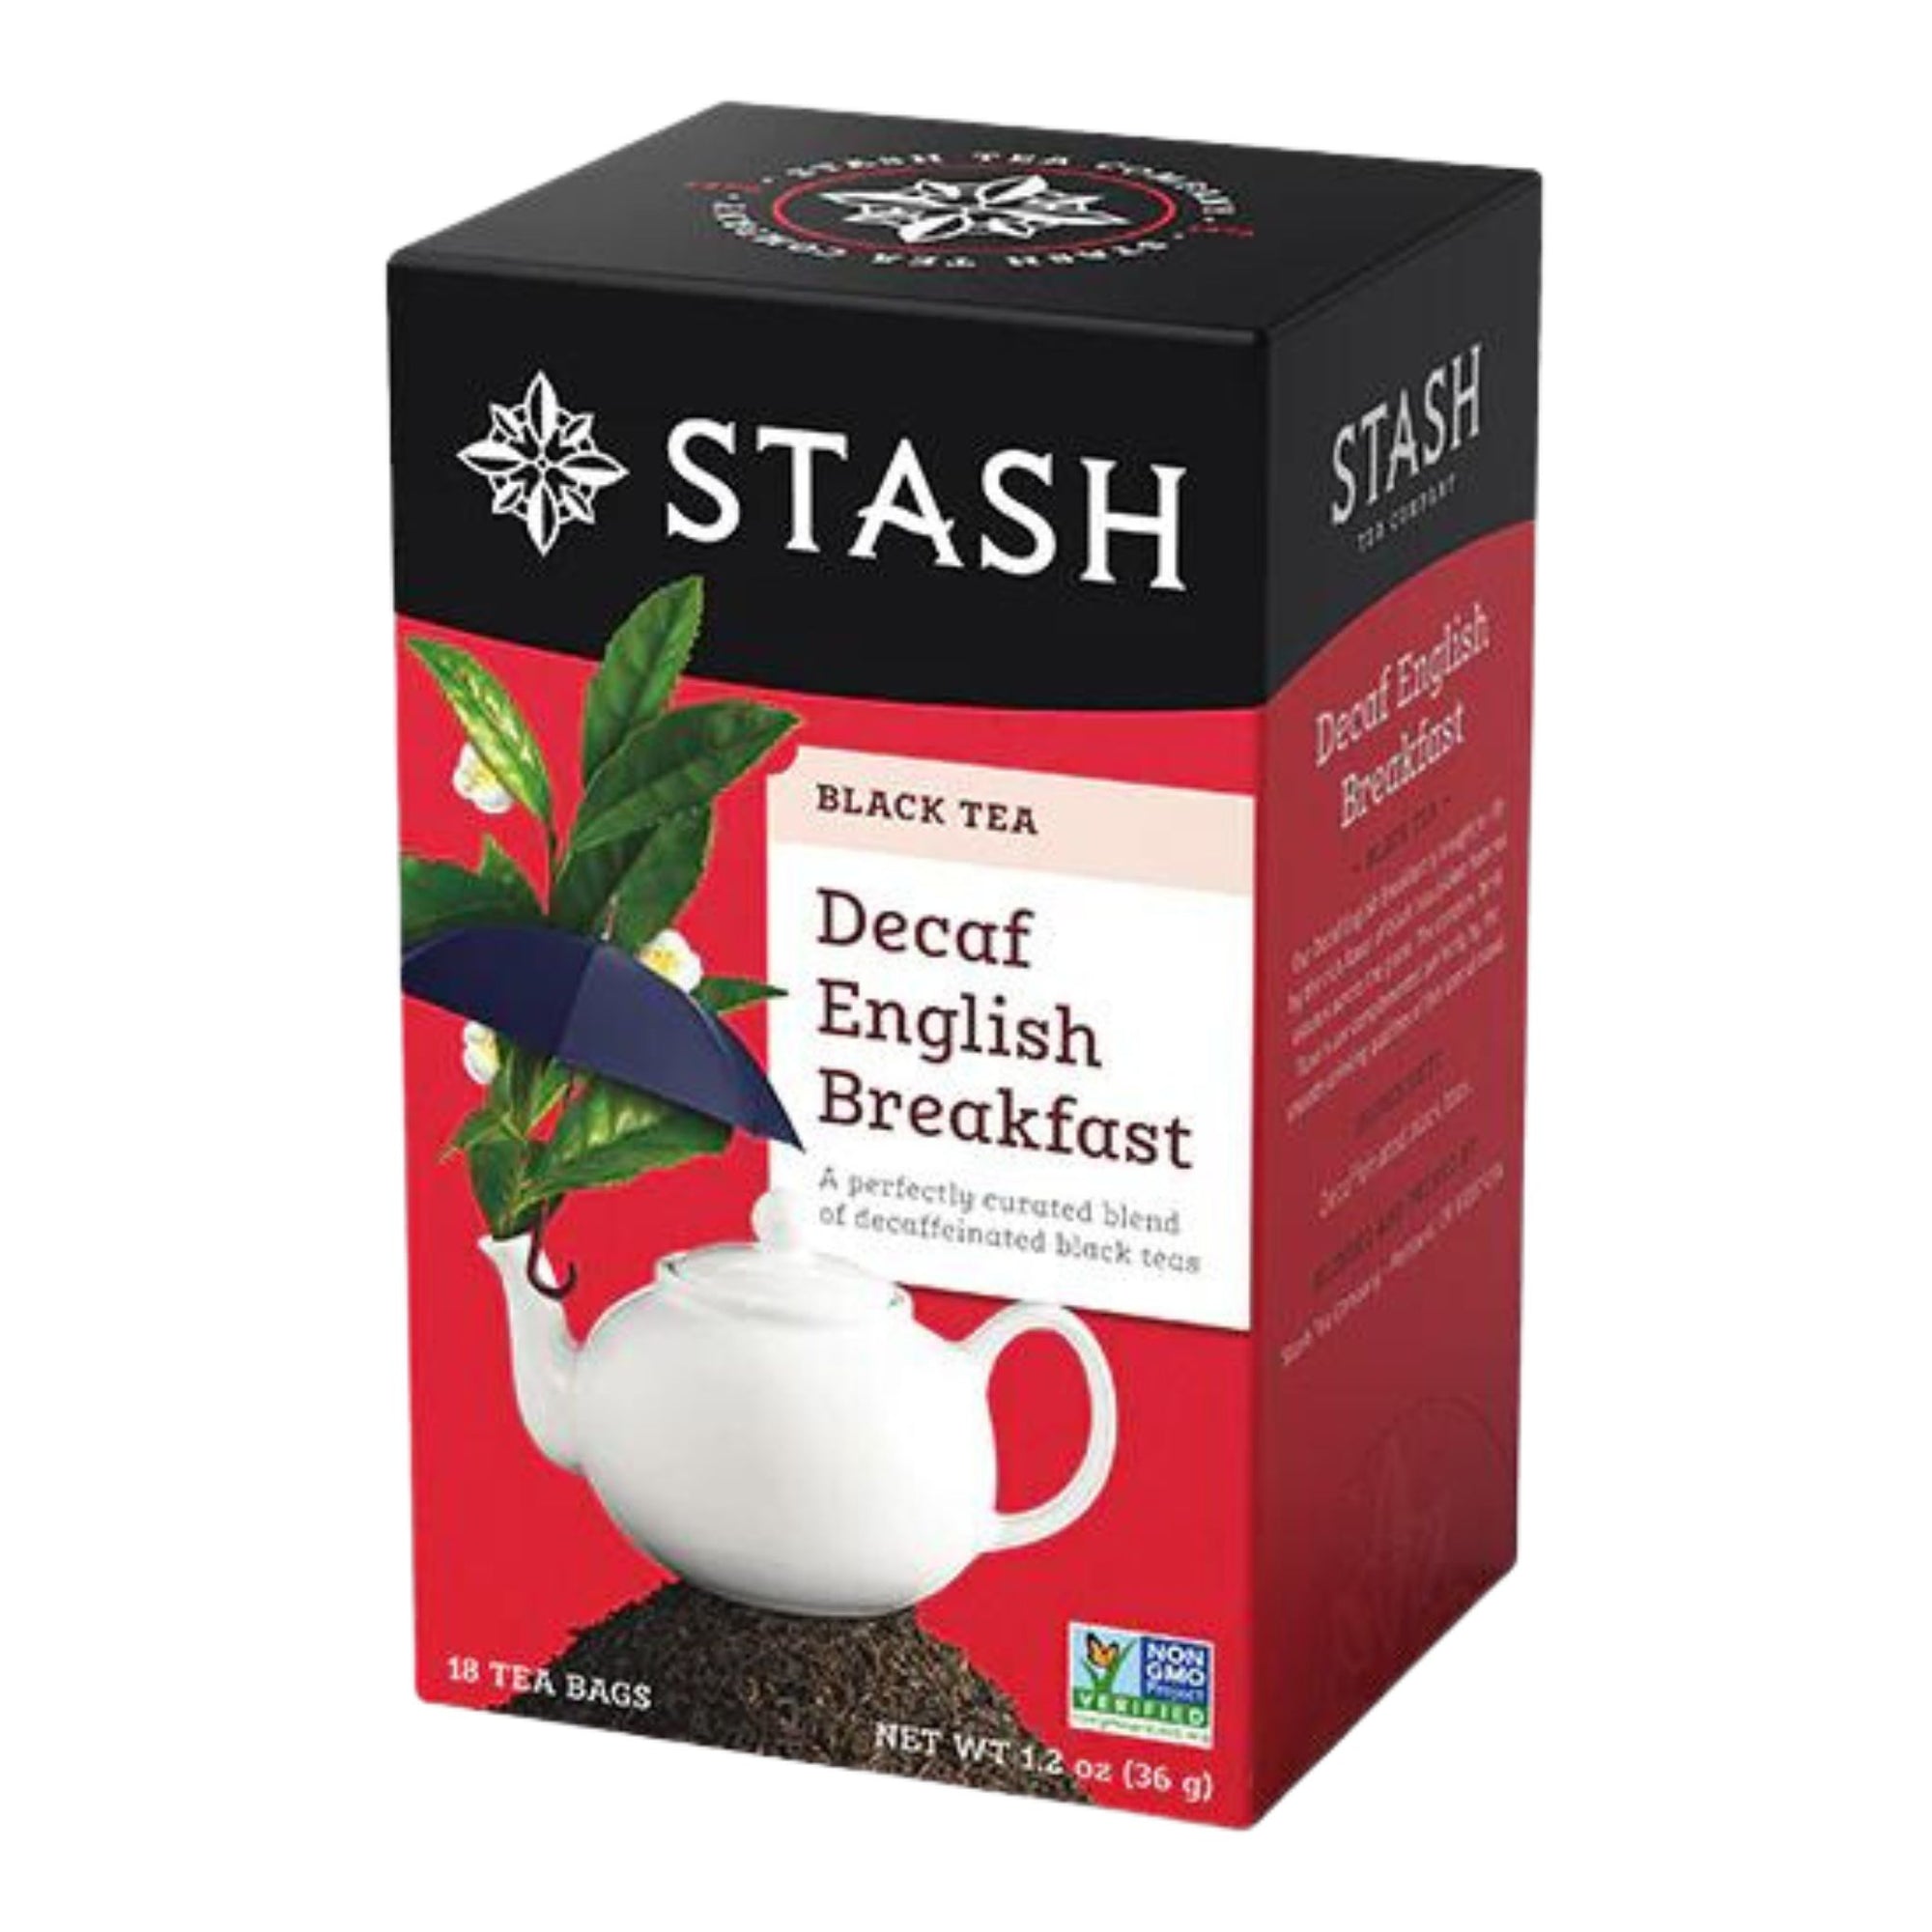 Stash Decaf English Breakfast Black Tea - 18 tea bags in a box -A perfectly curated blend of decaffeinated black teas. 